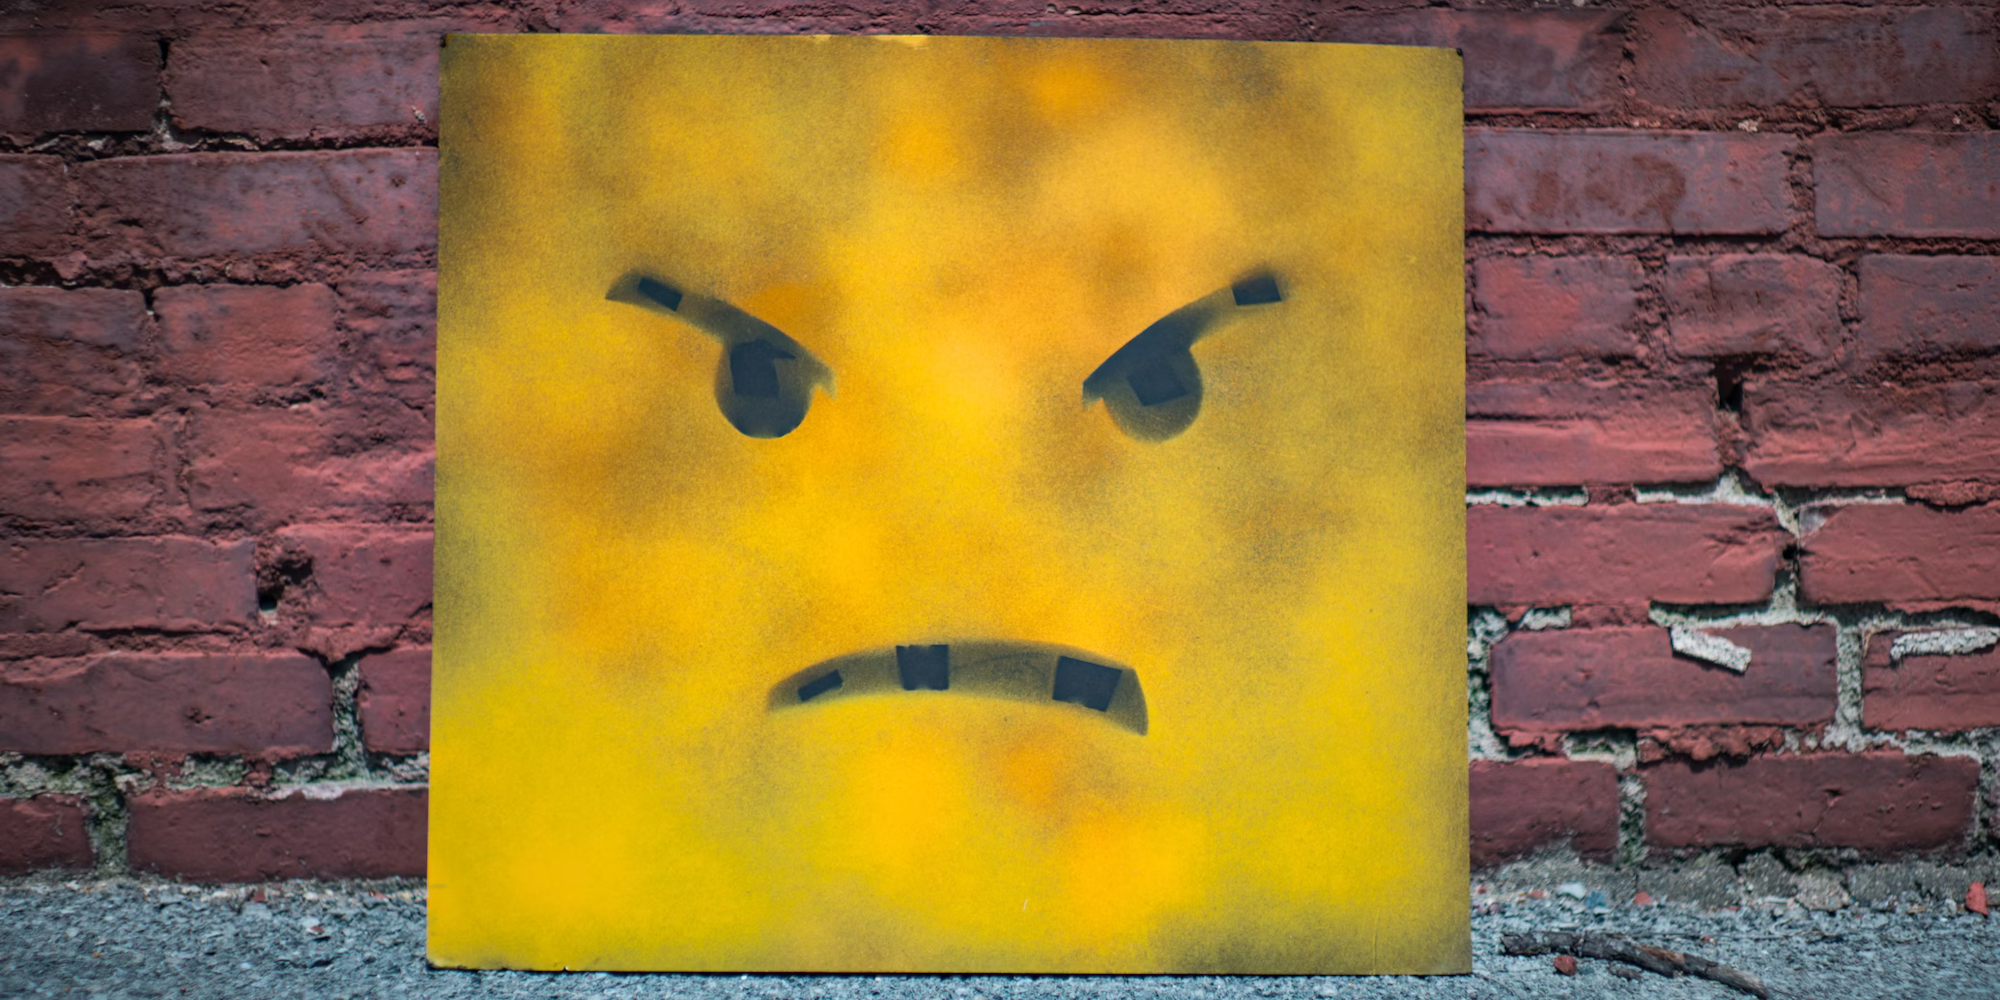 A face stencilled in black on a yellow paving slab leaning against a brick wall